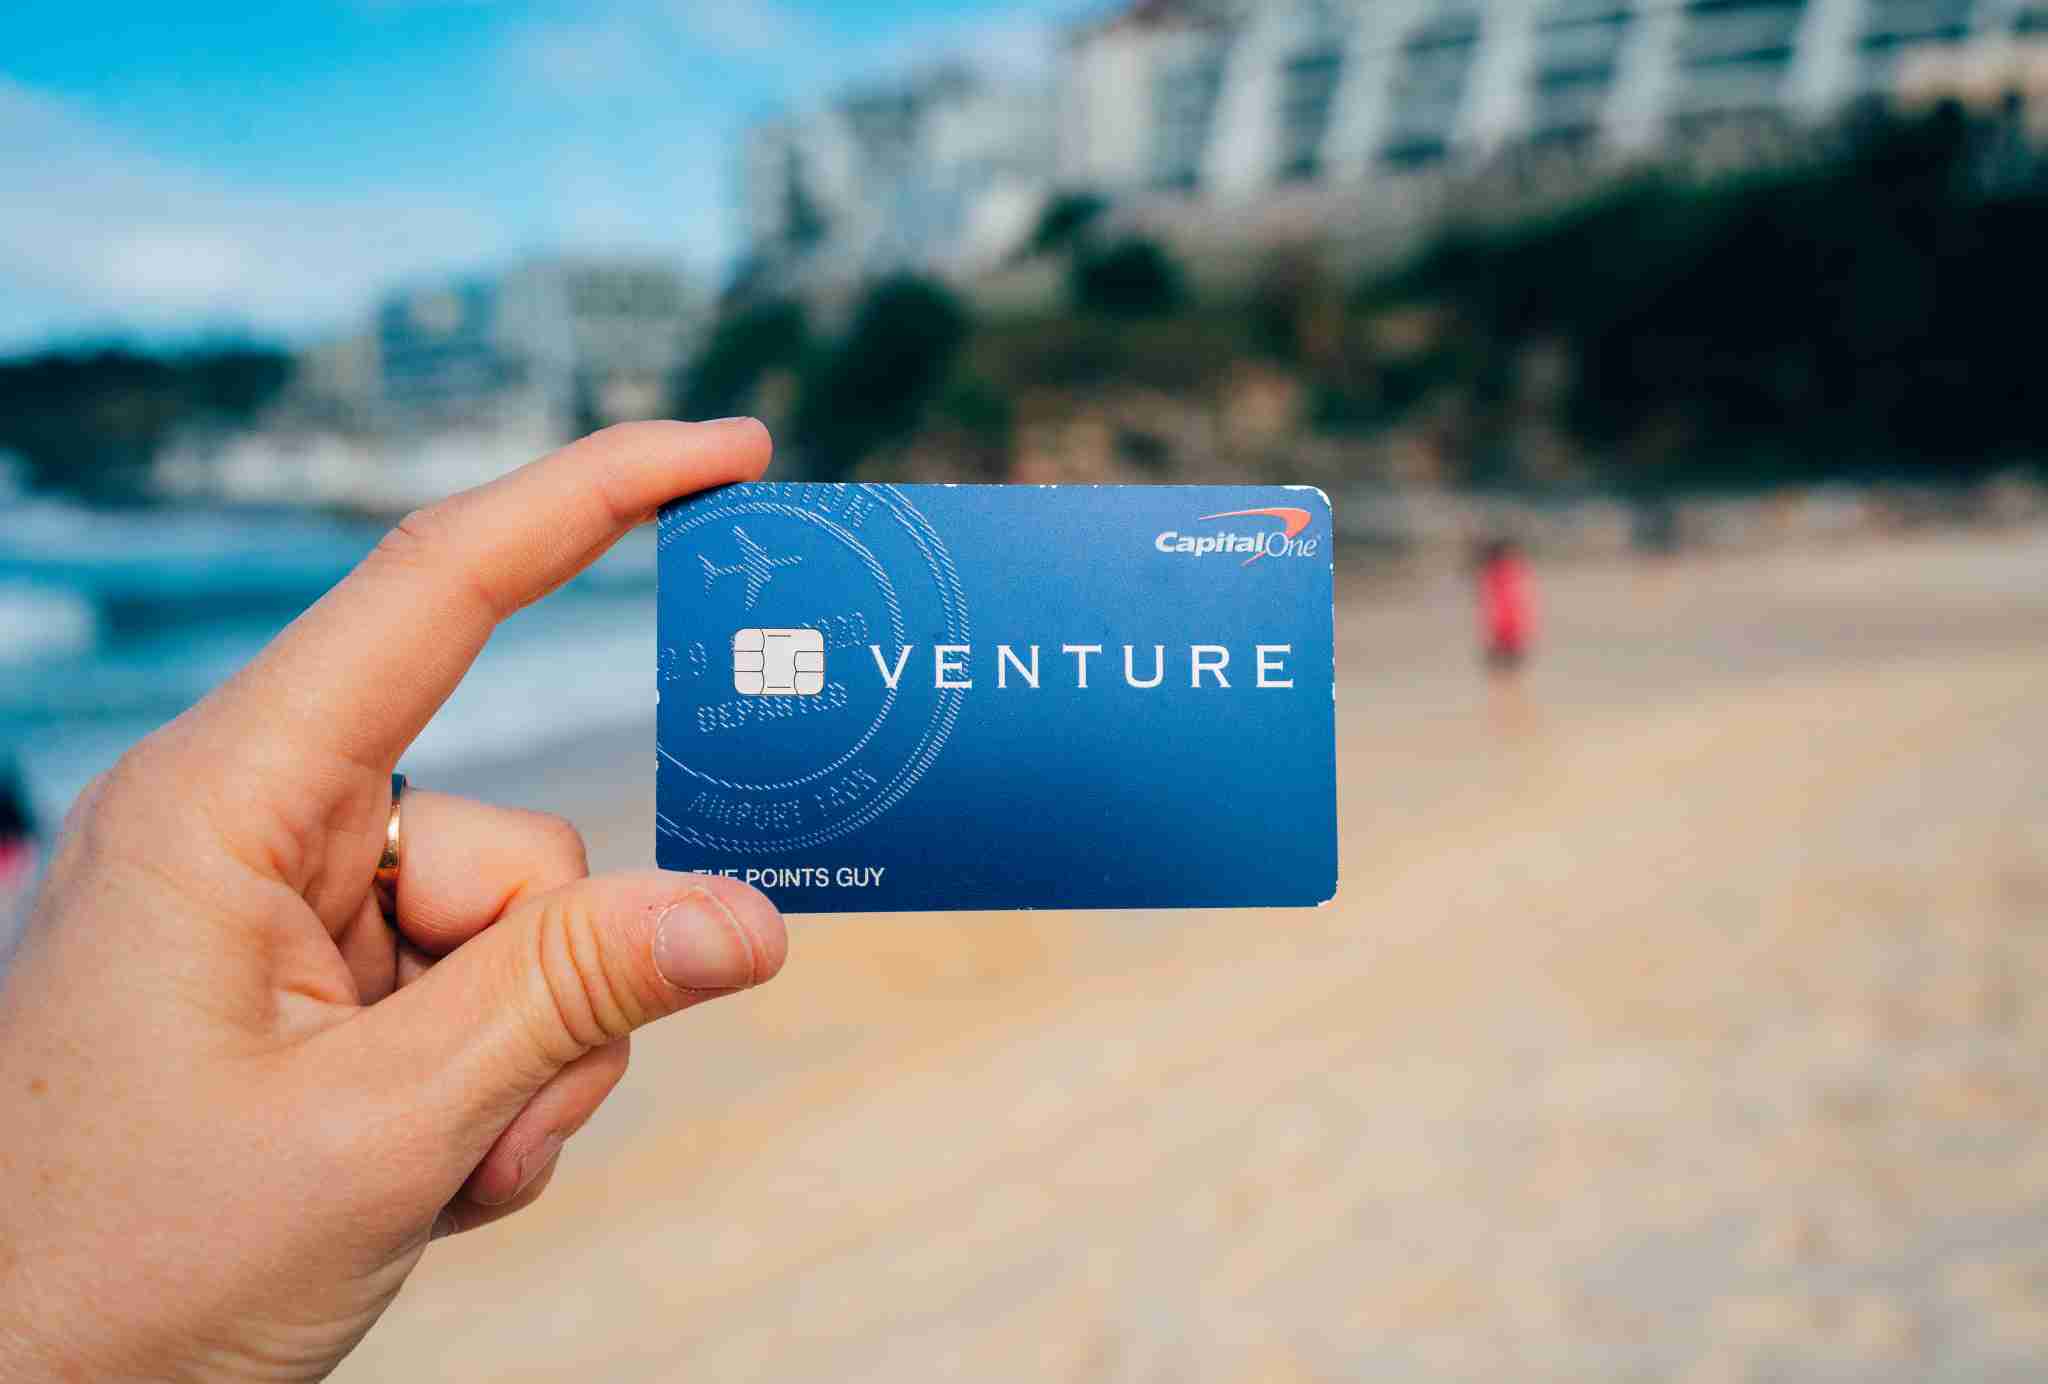 All The Ways The Capital One Venture Card Can Save You Money And Improve Your Life